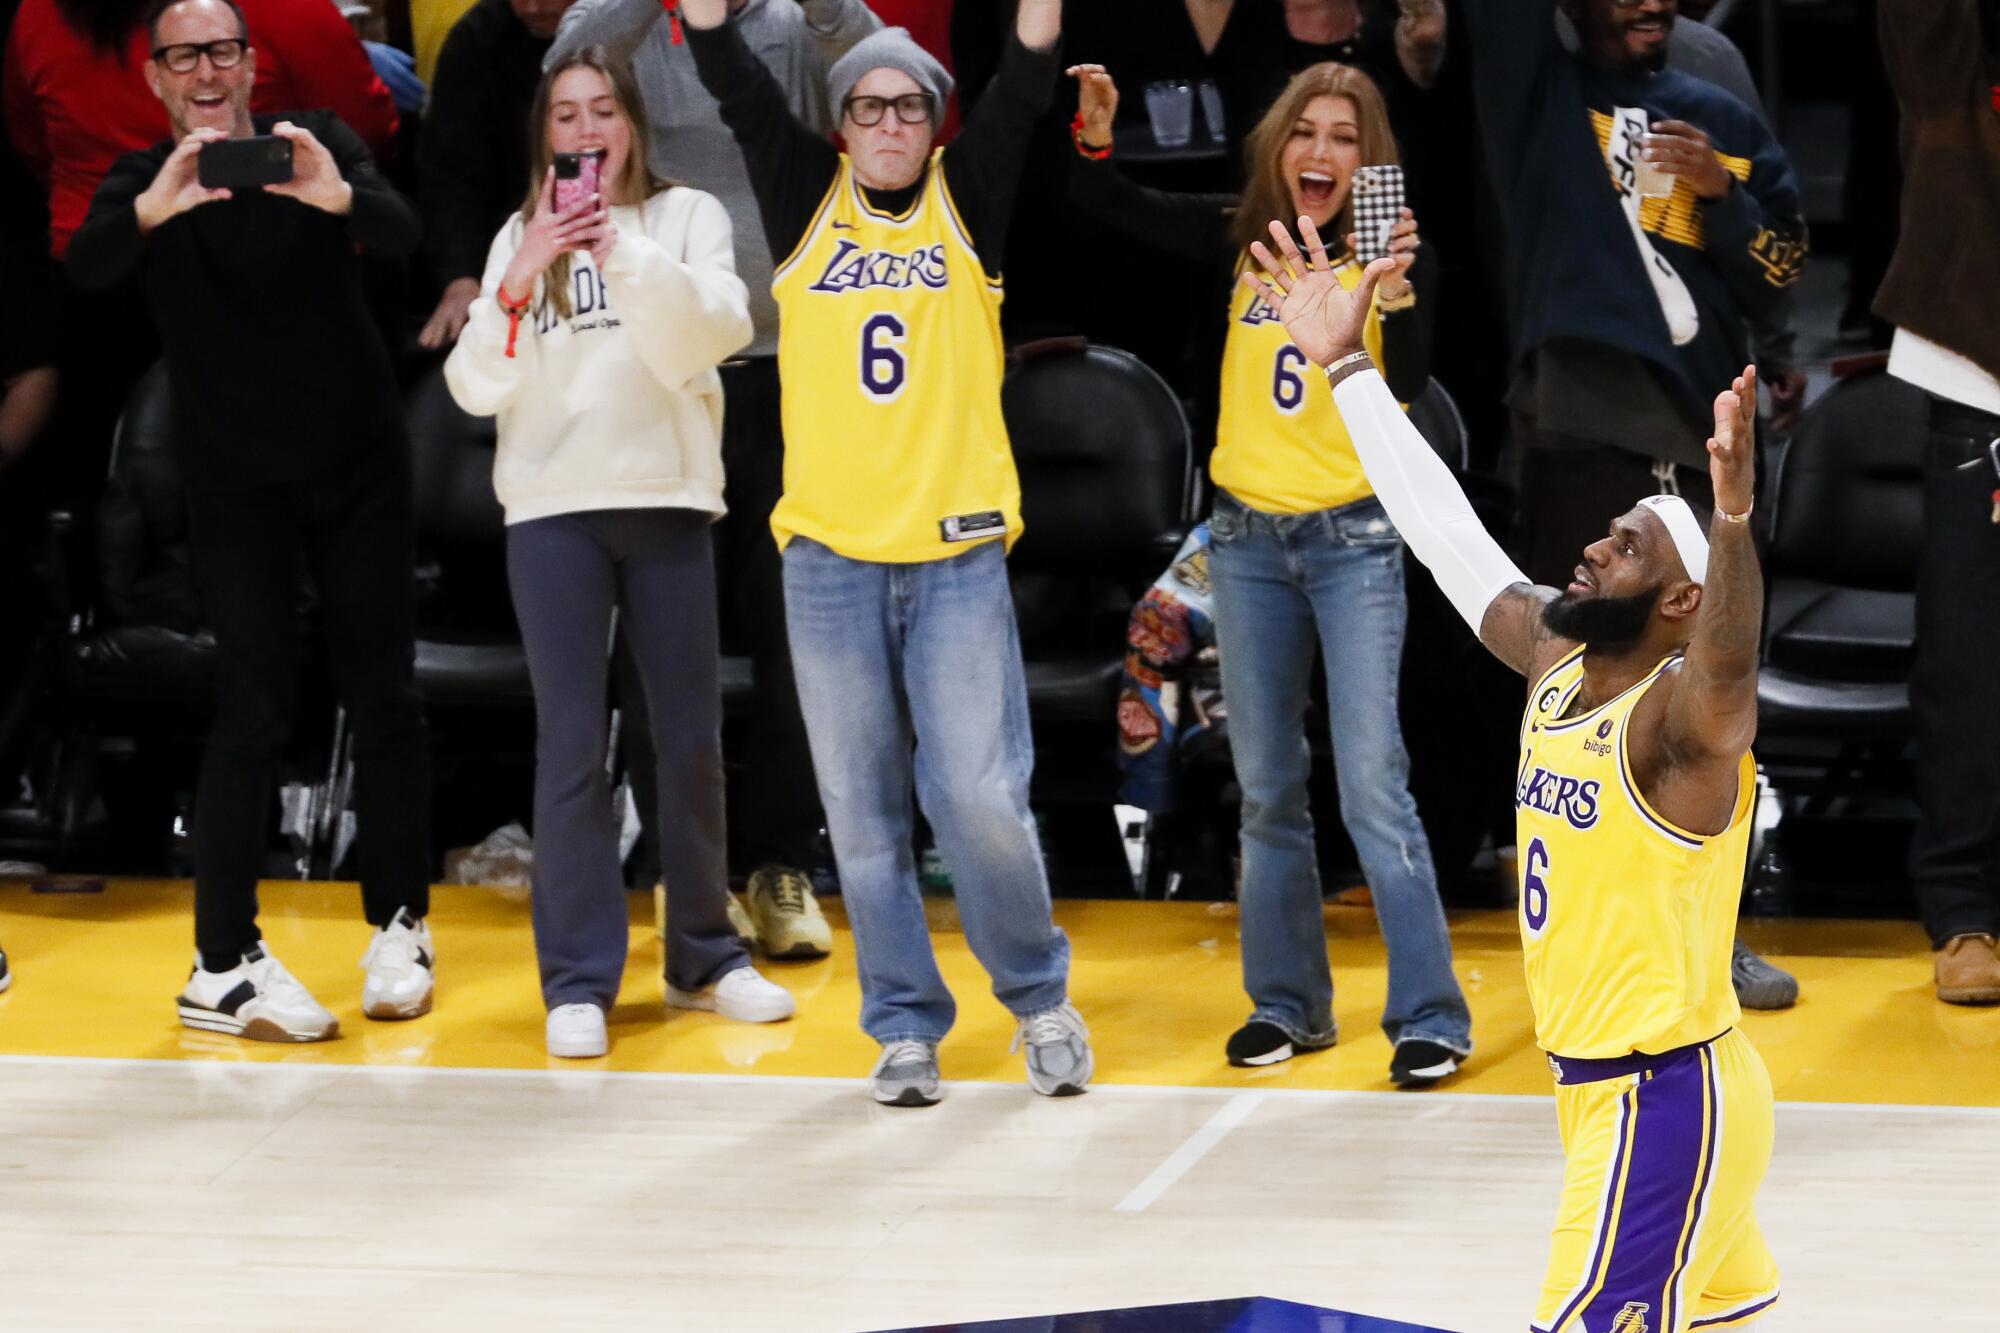 Lakers forward LeBron James throws his arms in the air after making the basket that gave him the NBA's all-time scoring lead.